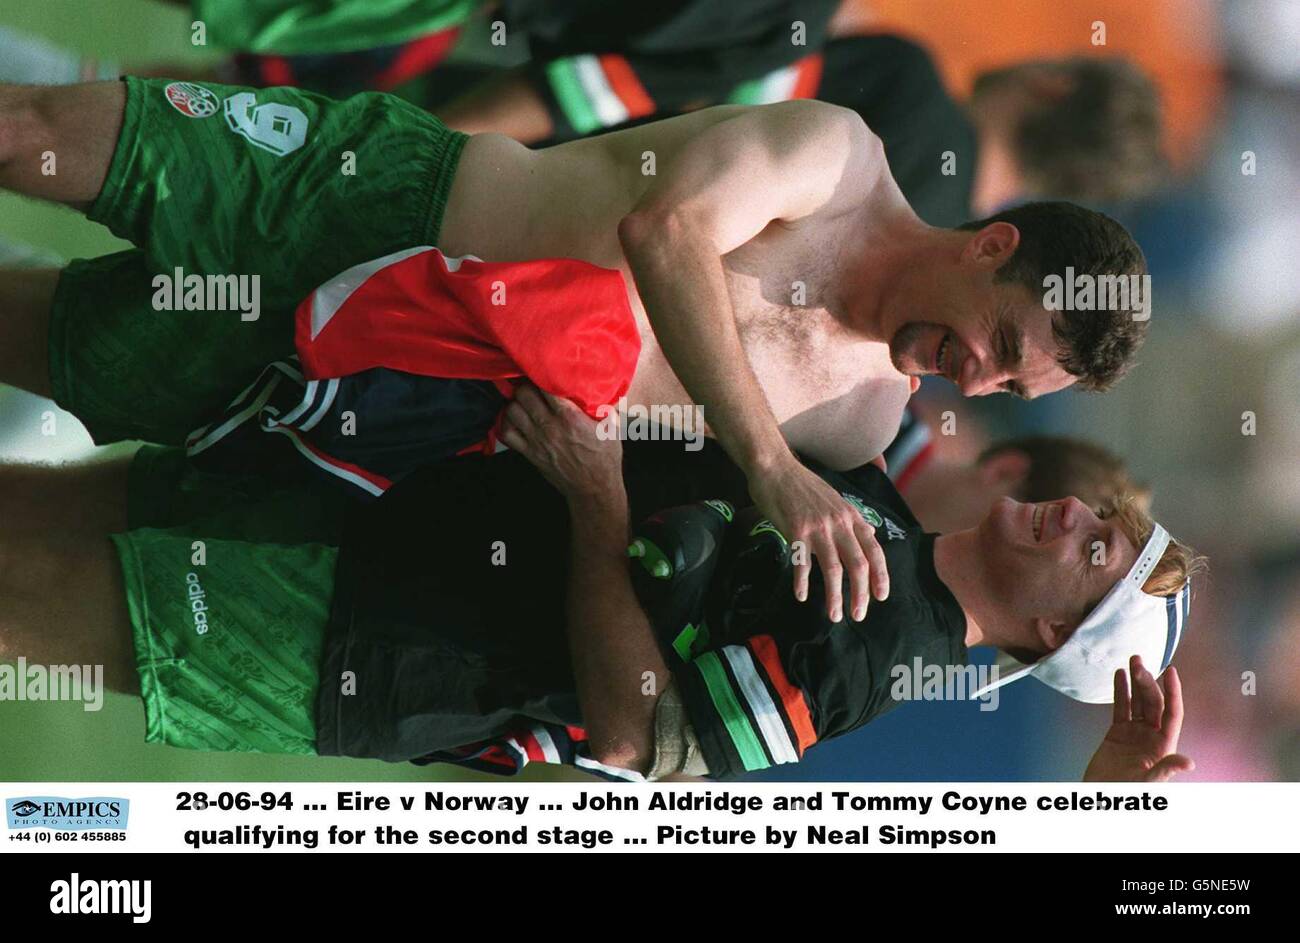 Empics14,Eire v Norway .... Soccer World Cup 94 Stock Photo